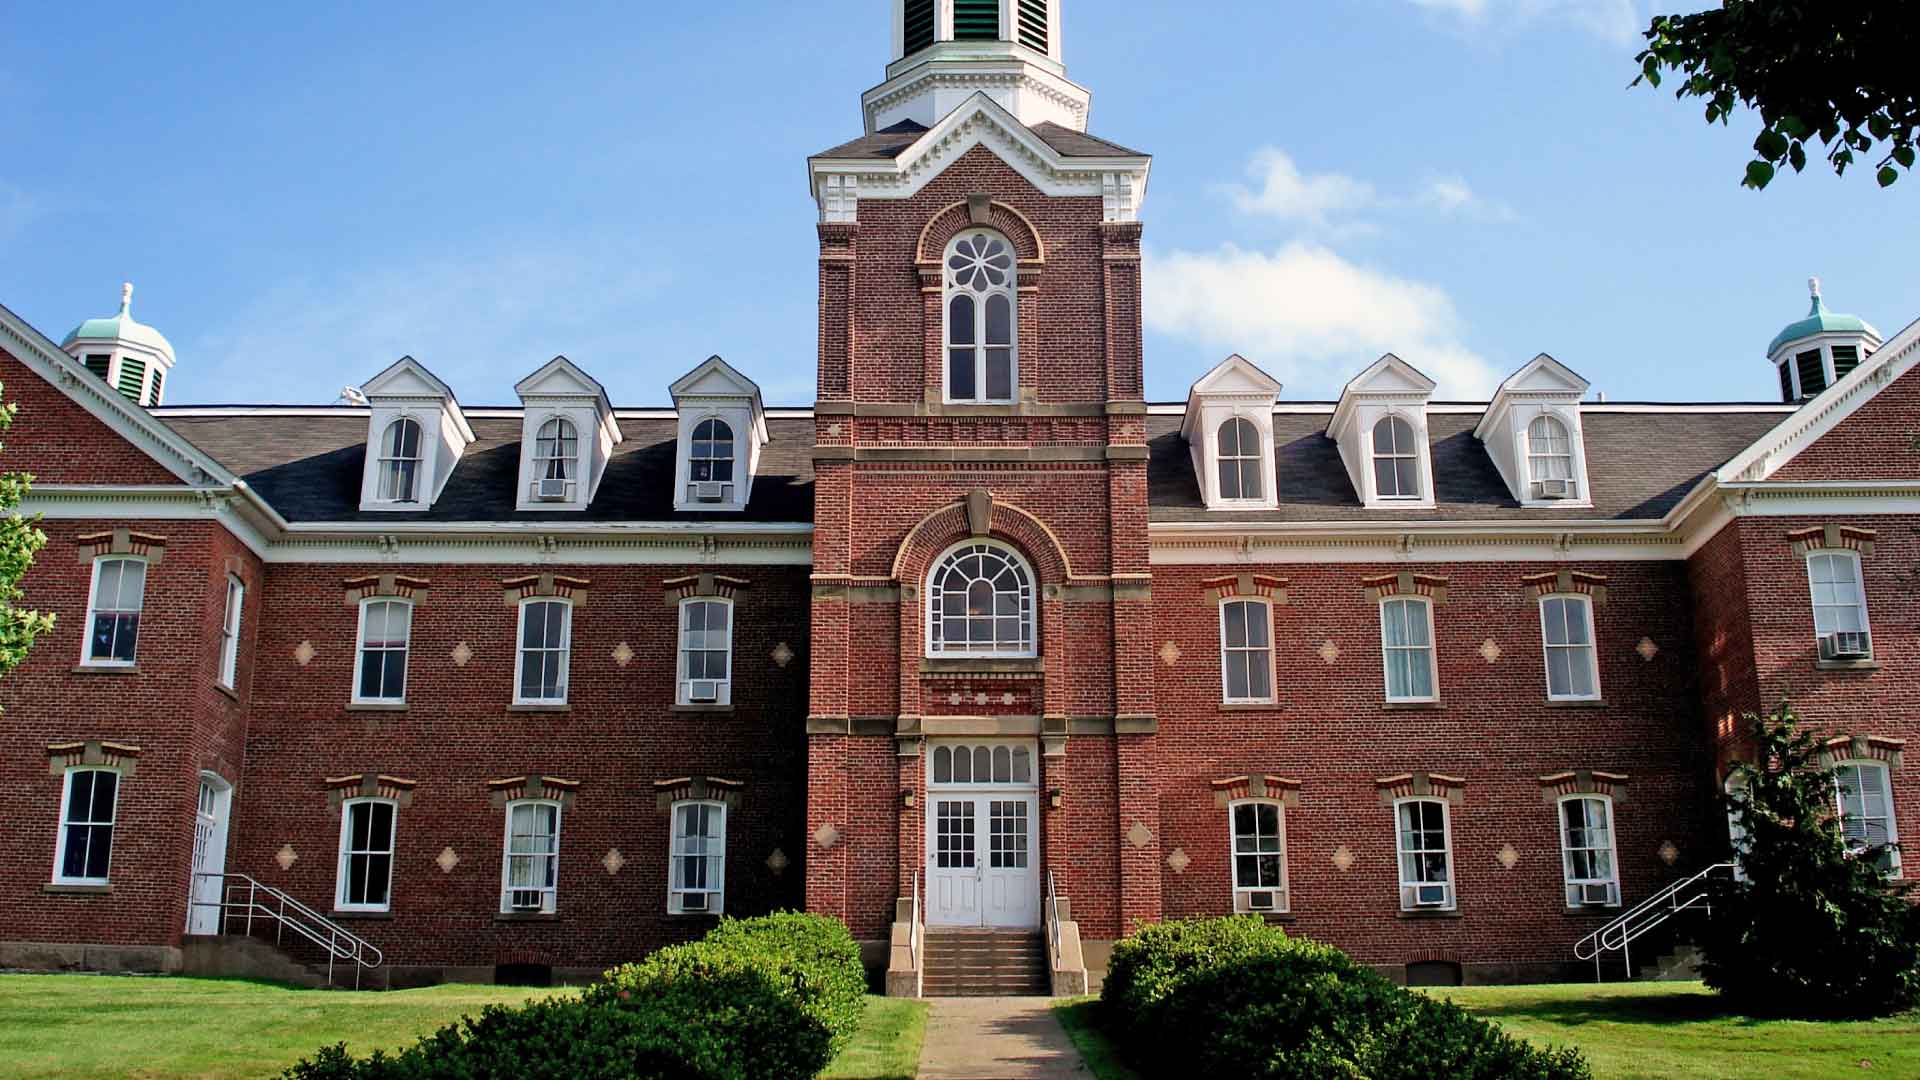 Red brick building with tower and walkway under blue skies on the St. Francis Xavier University campus